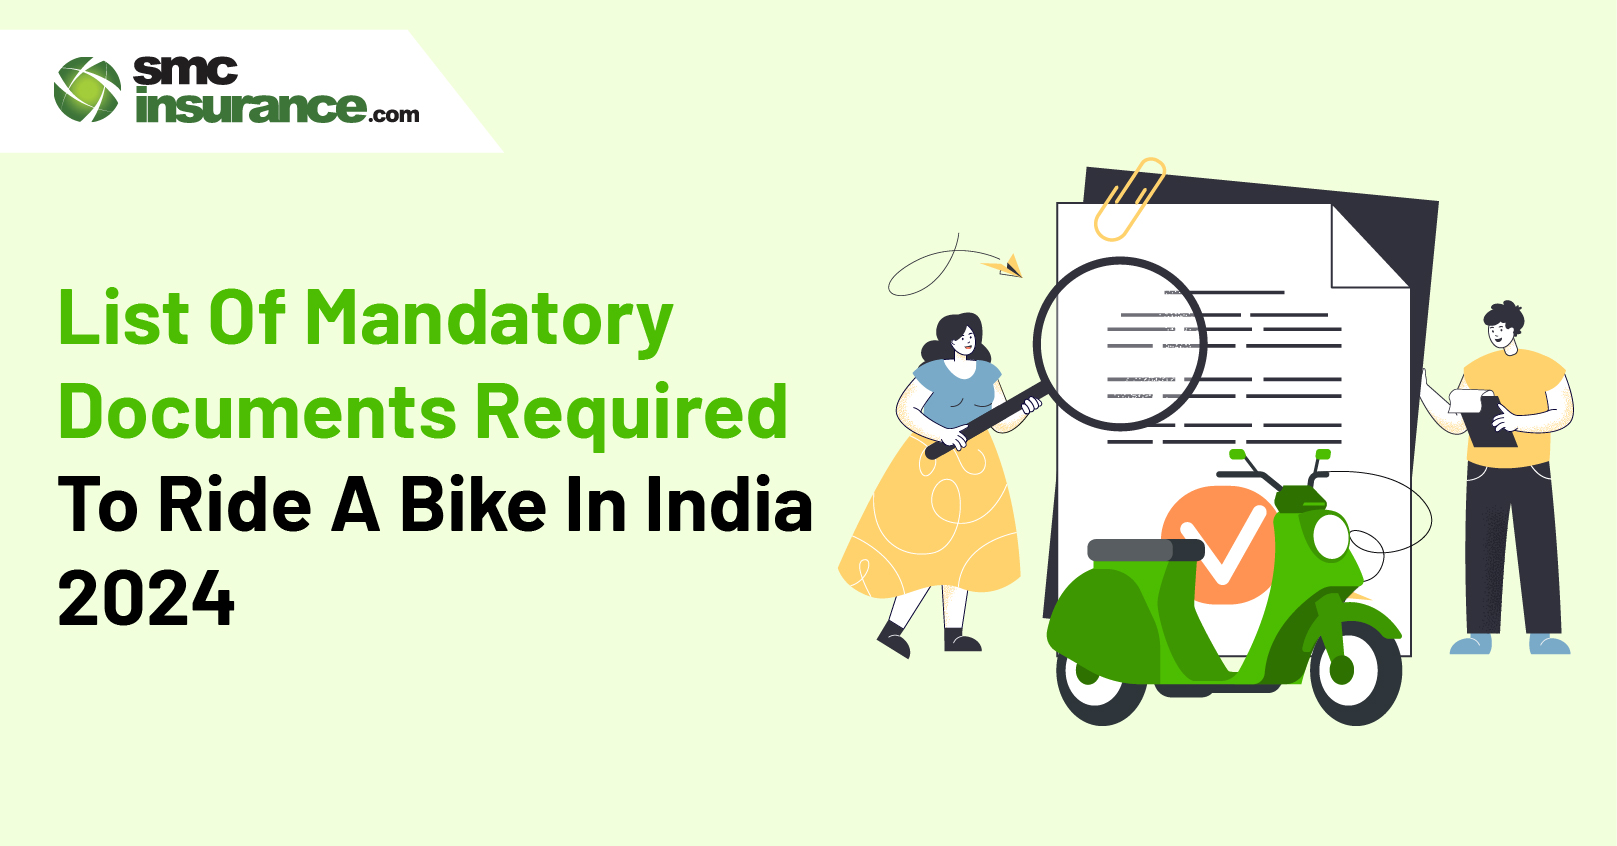 List Of Mandatory Documents Required To Ride A Bike In India 2024